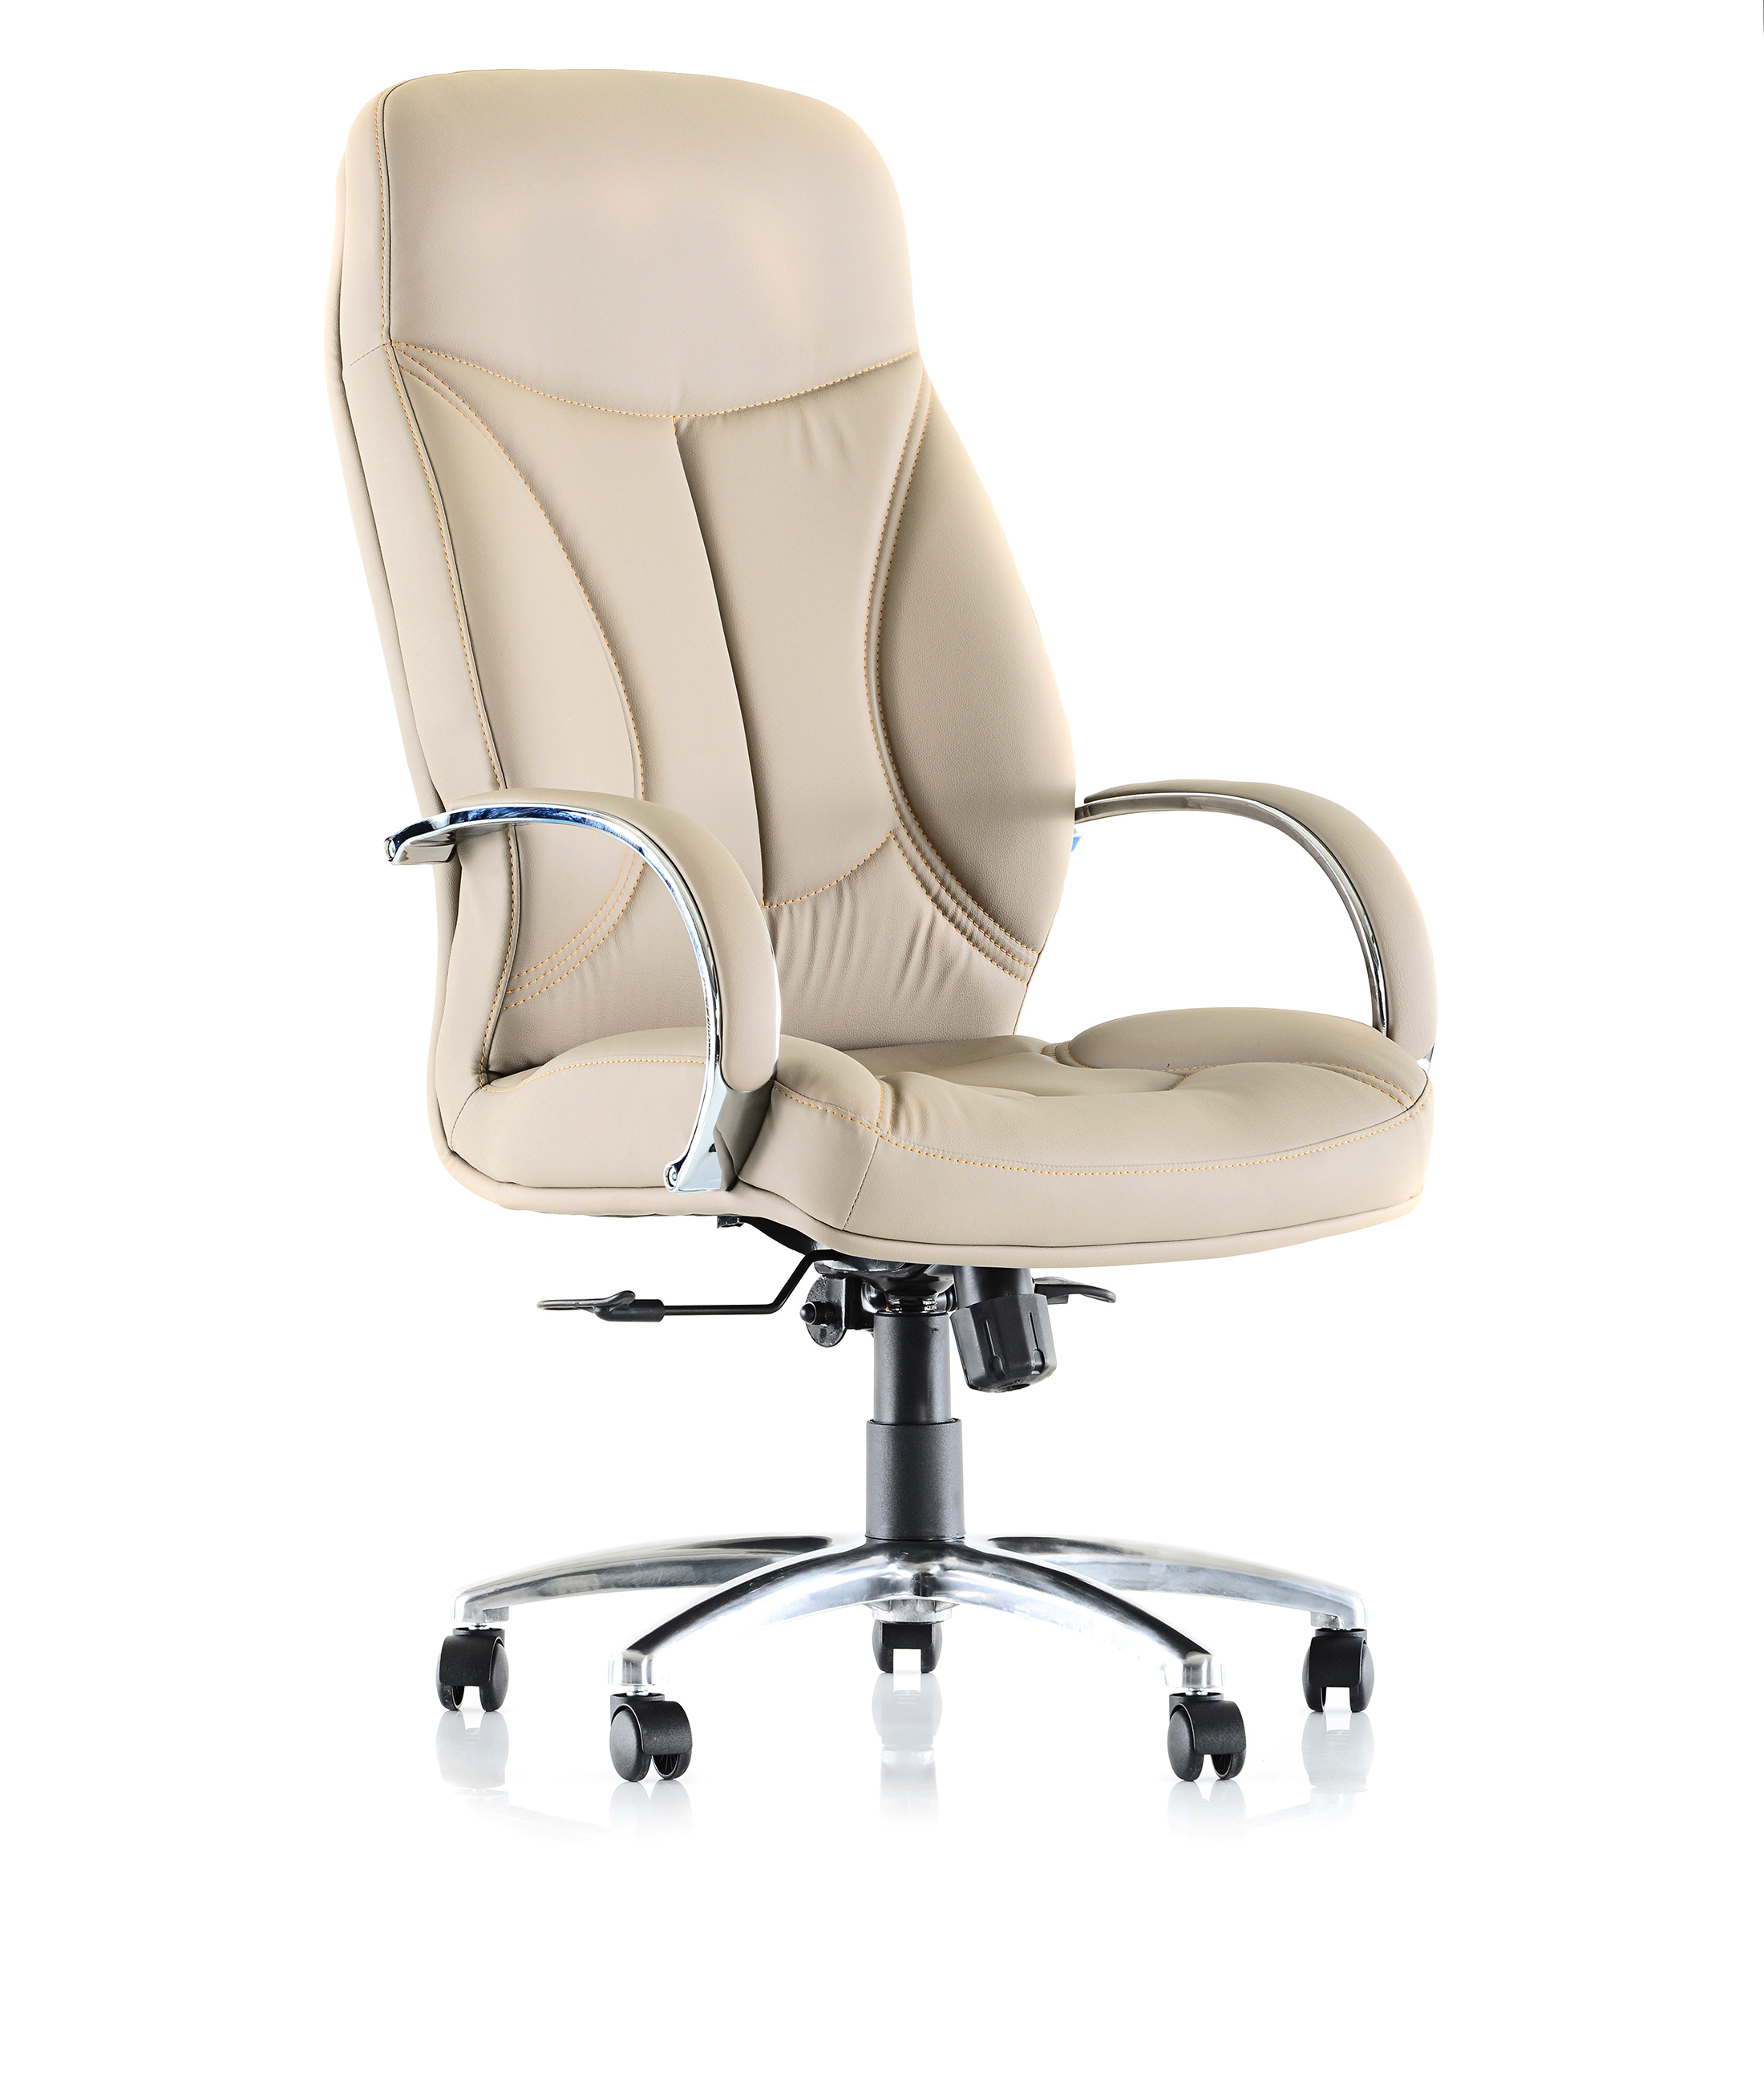 RICCO 000C MANAGER CHAIR